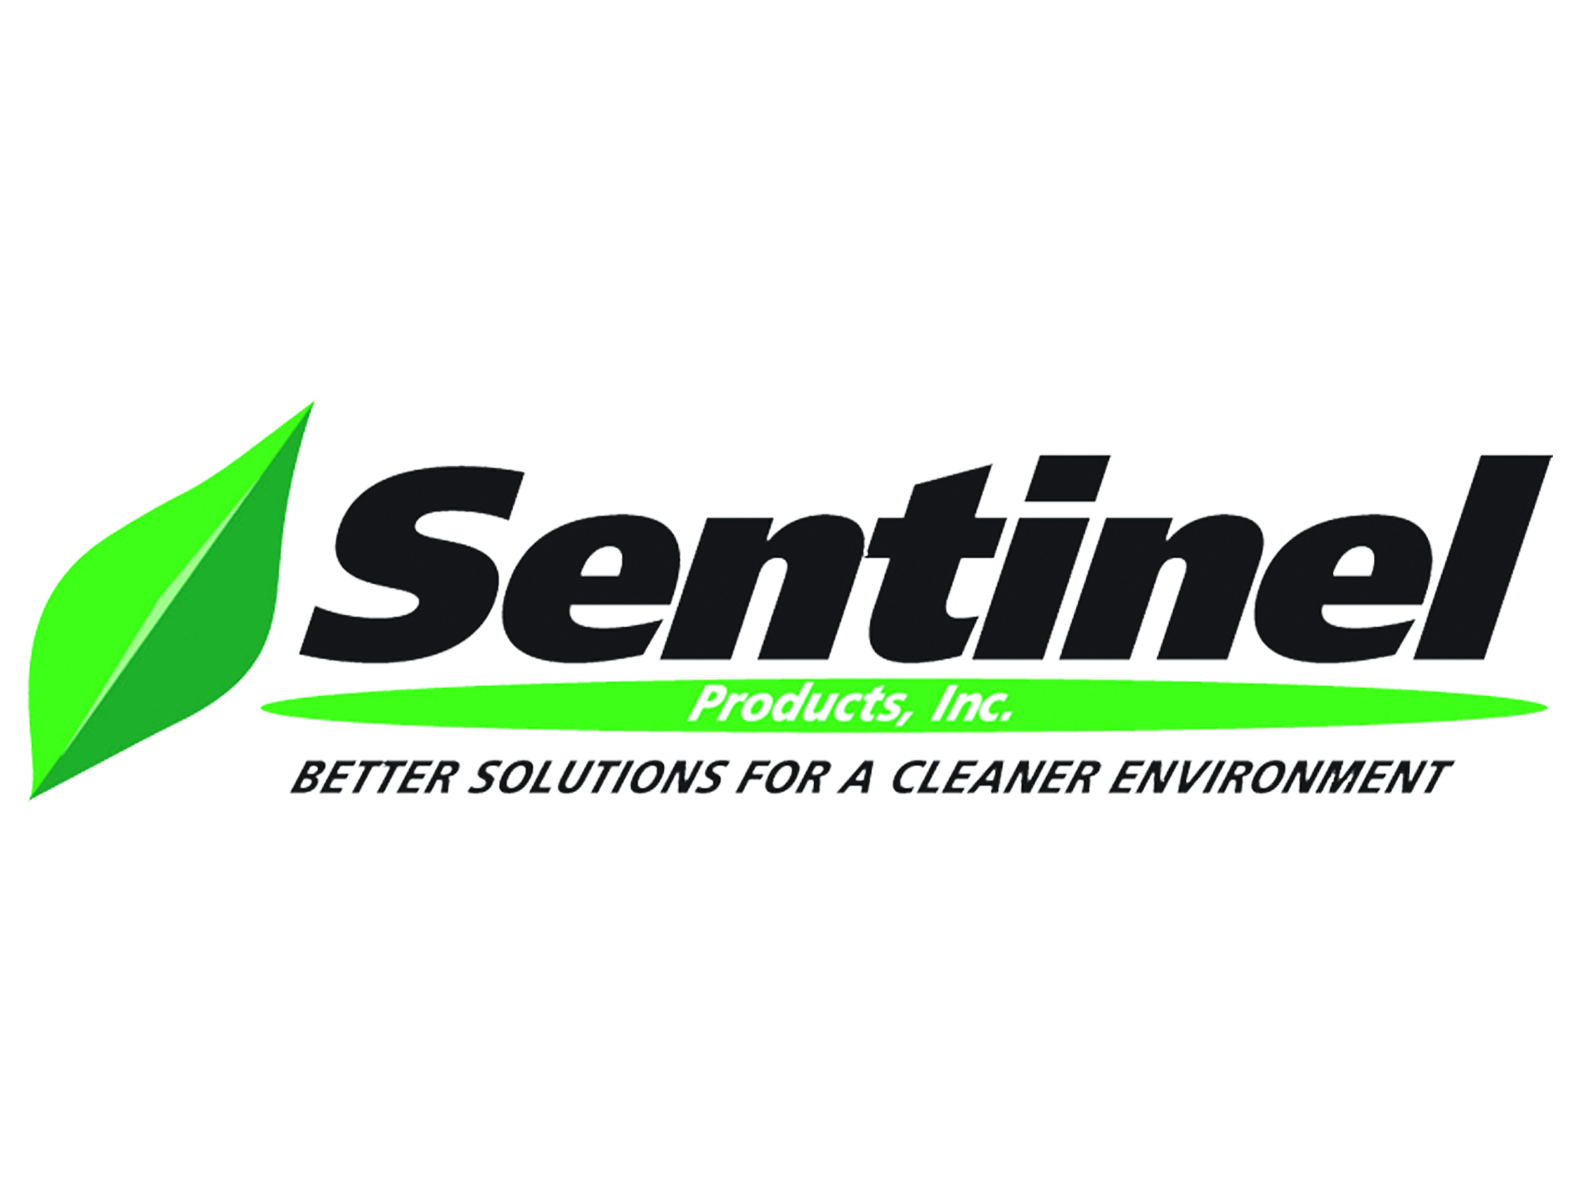 Sentinel 317 Multi-Purpose Cleaner & Degreaser: 1 gallon plastic container with handle, 5 gallon pictured in the background